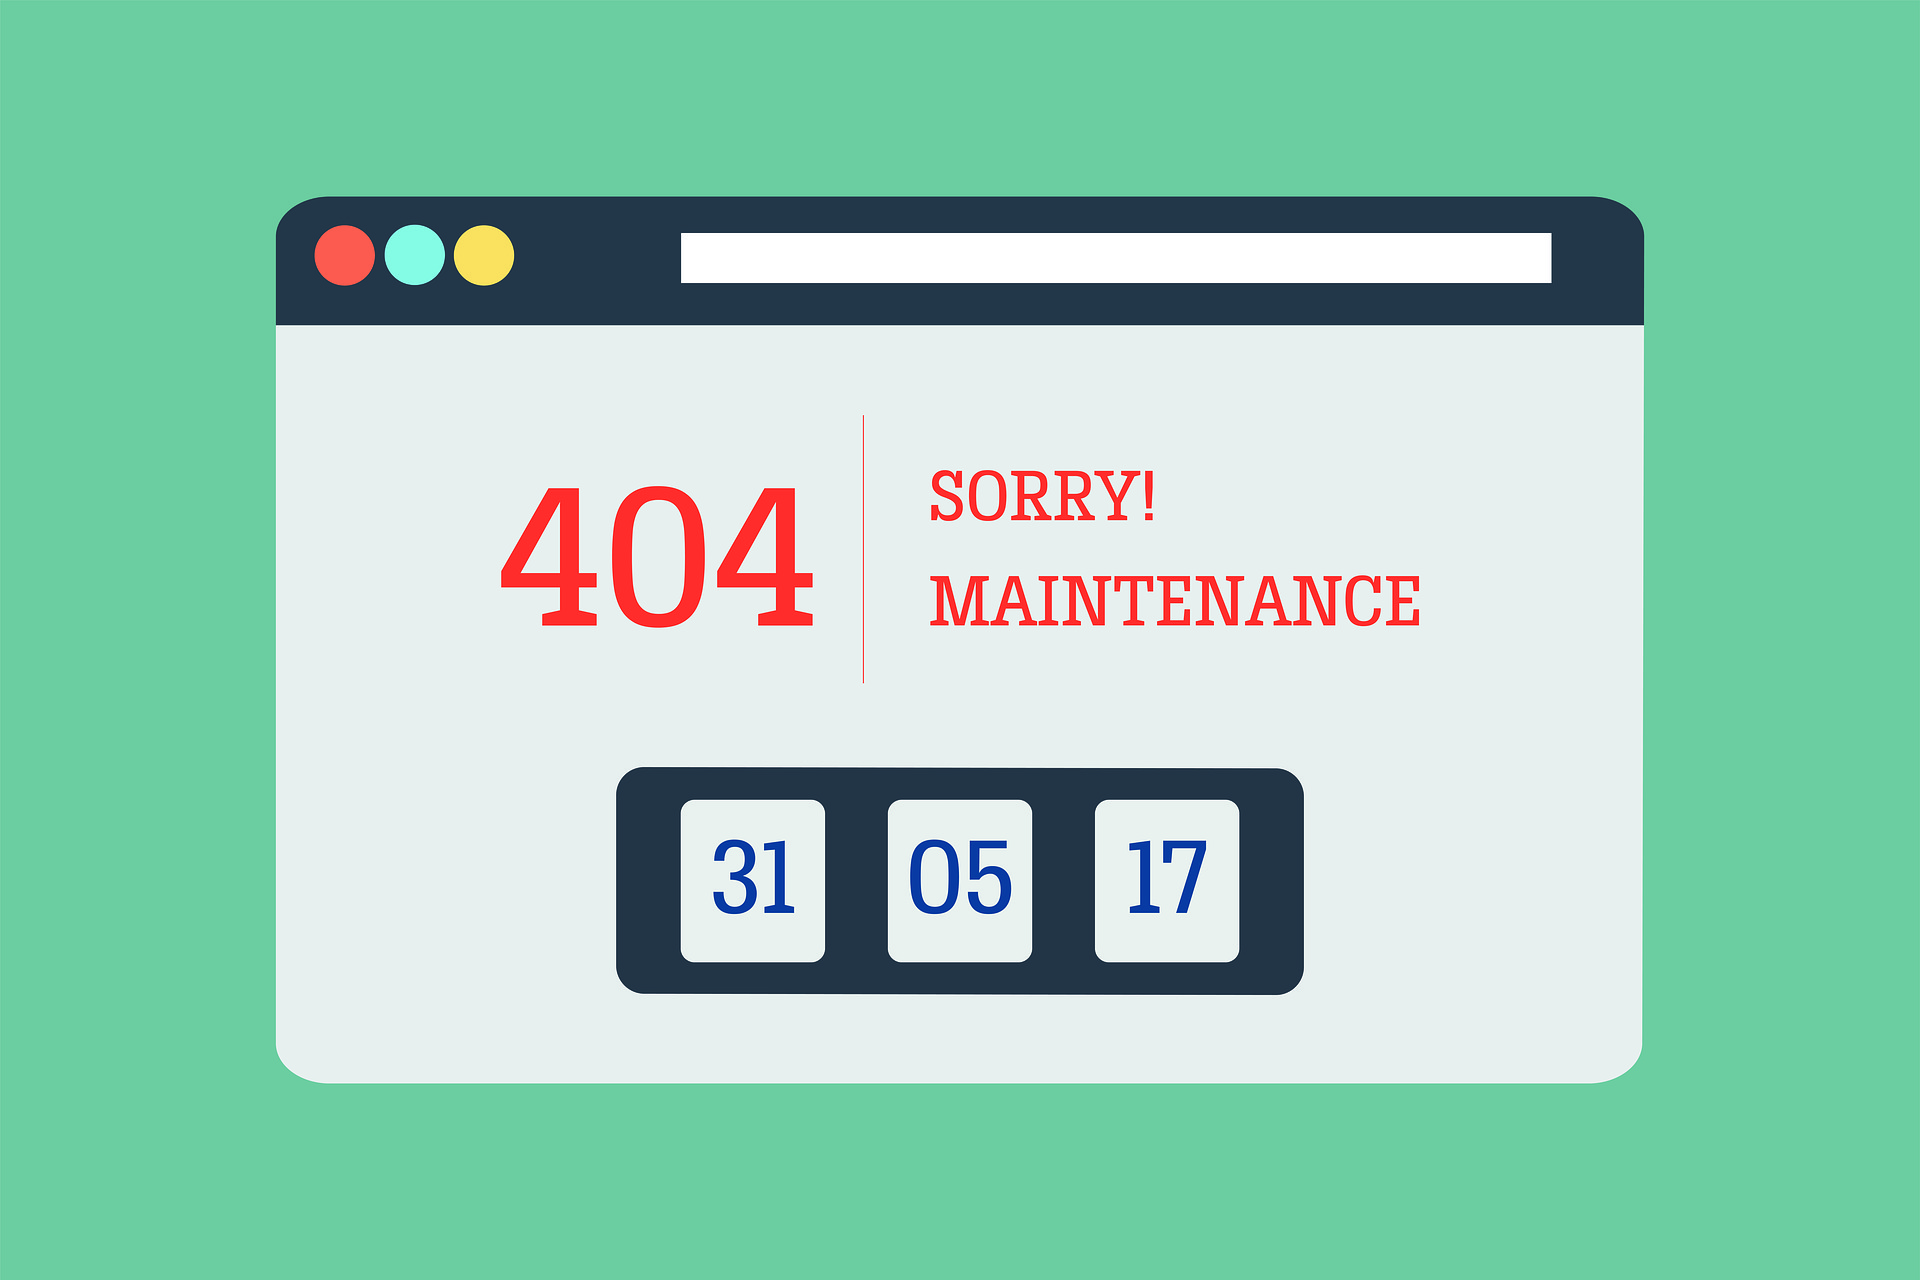 The Best Way To Handle Website Downtime